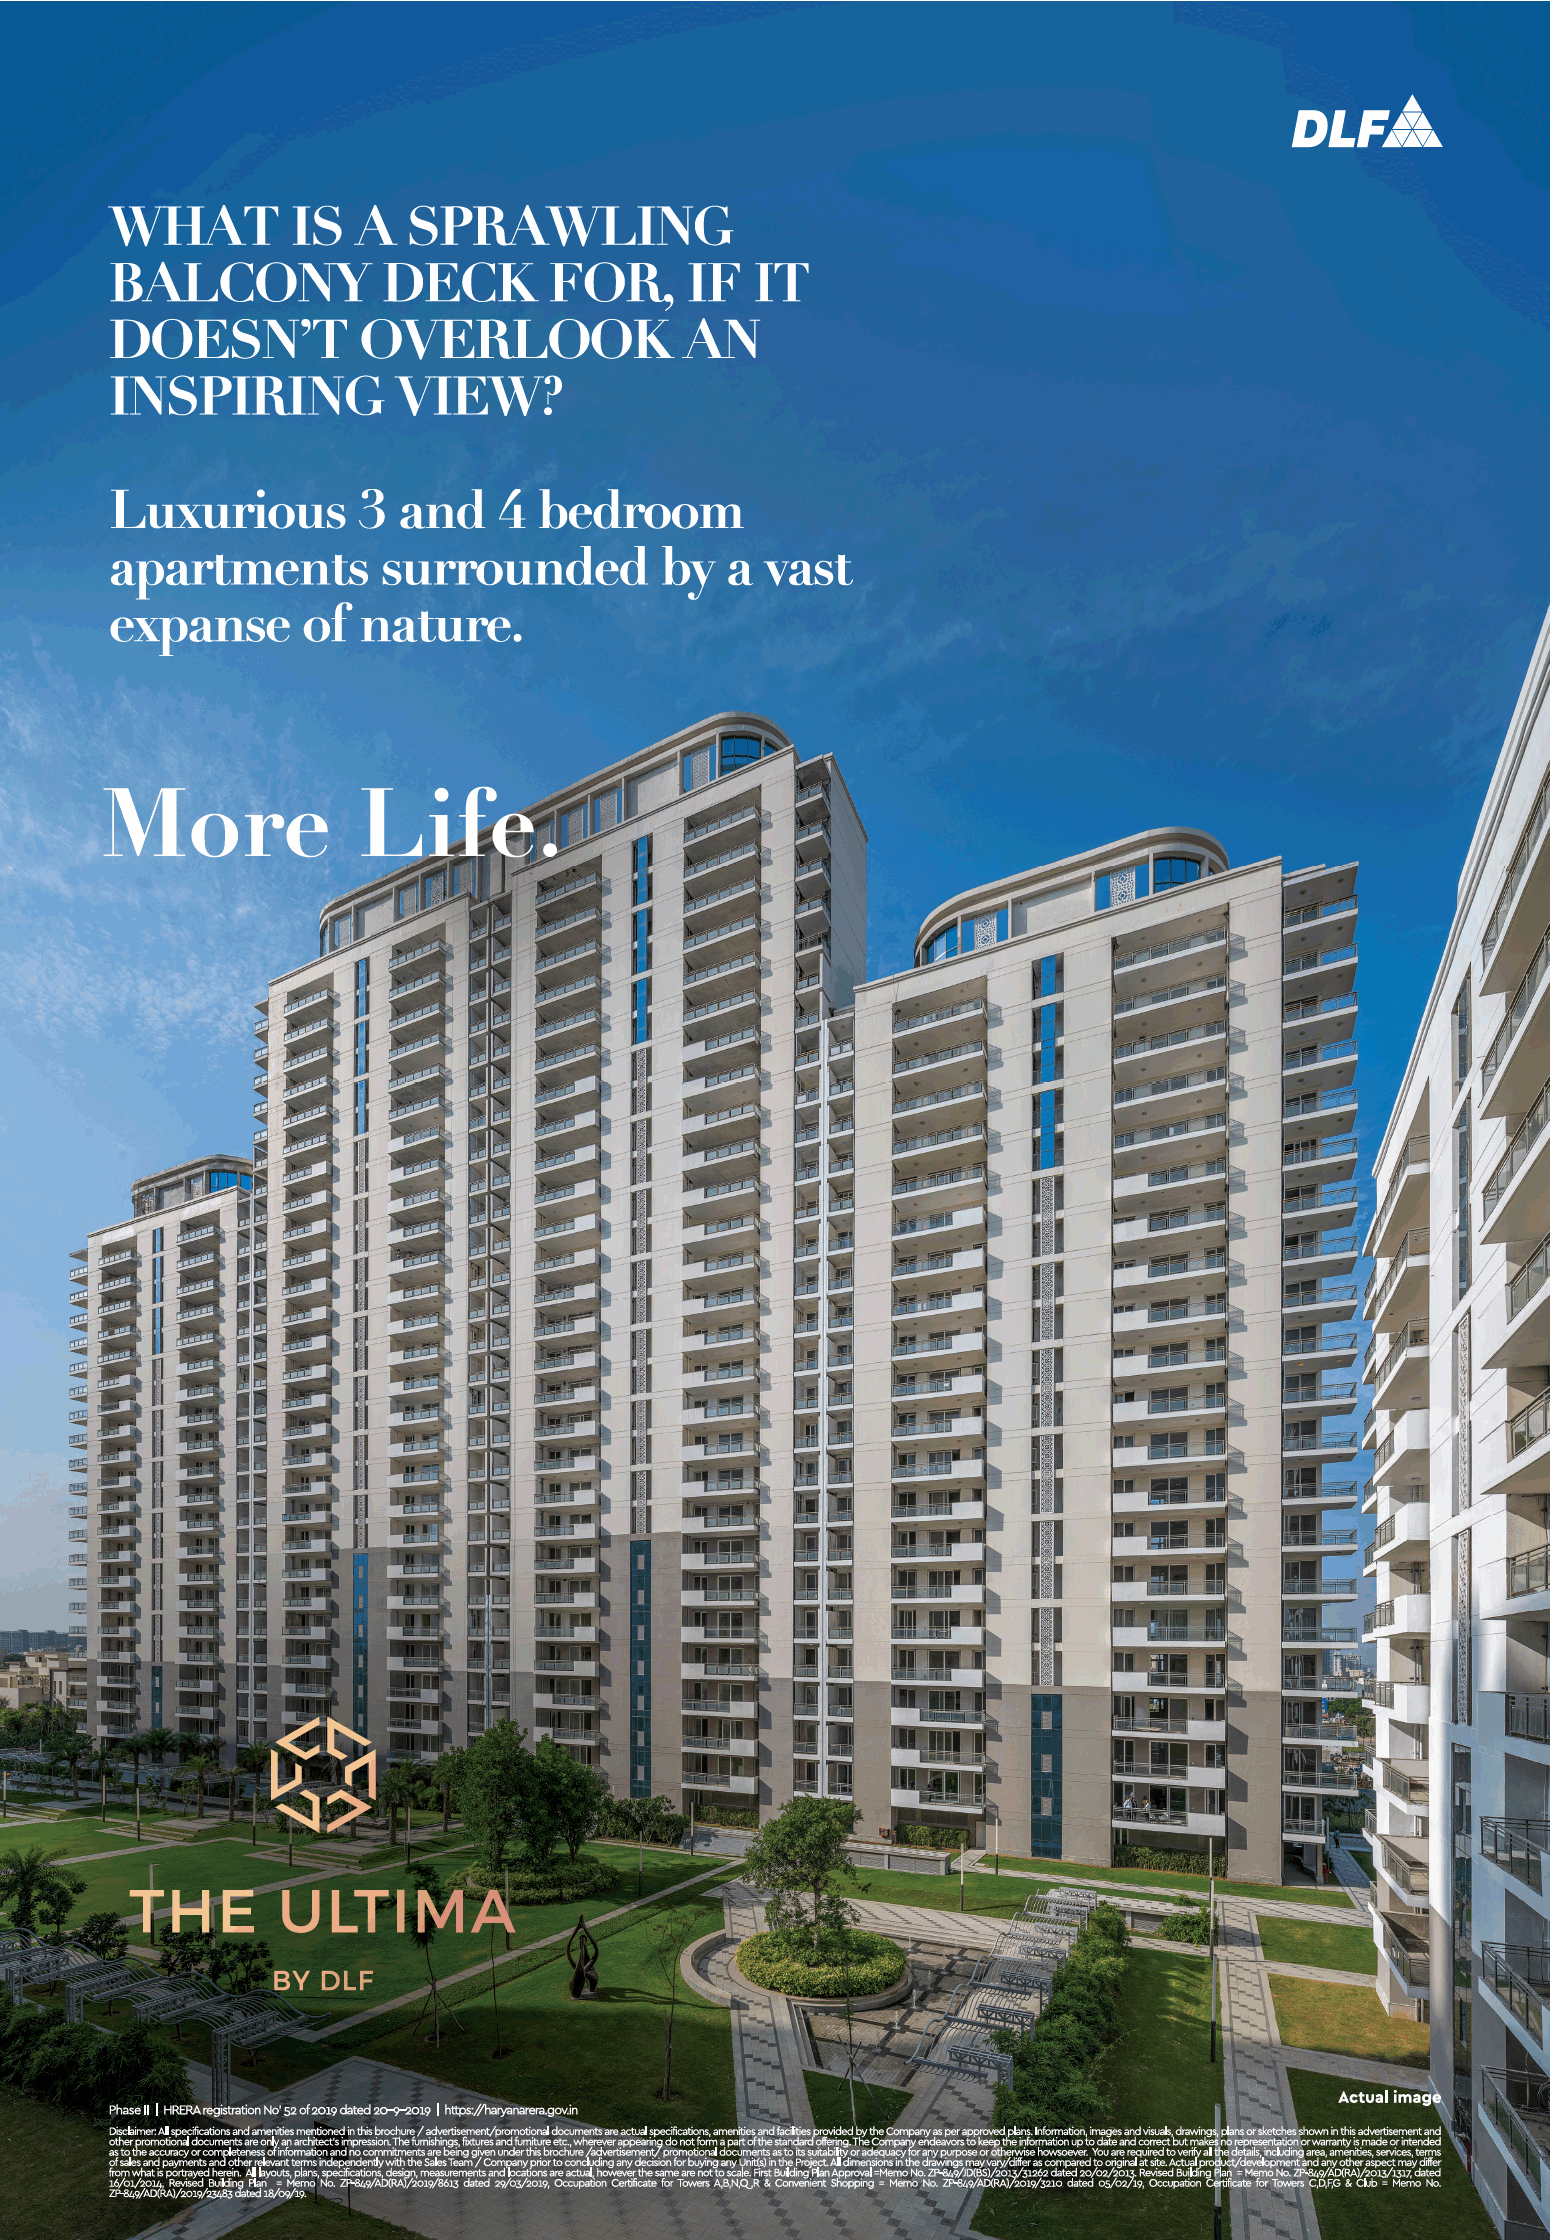 Luxurious 3 and 4 bedroom apartments at DLF Ultima in Gurgaon Update